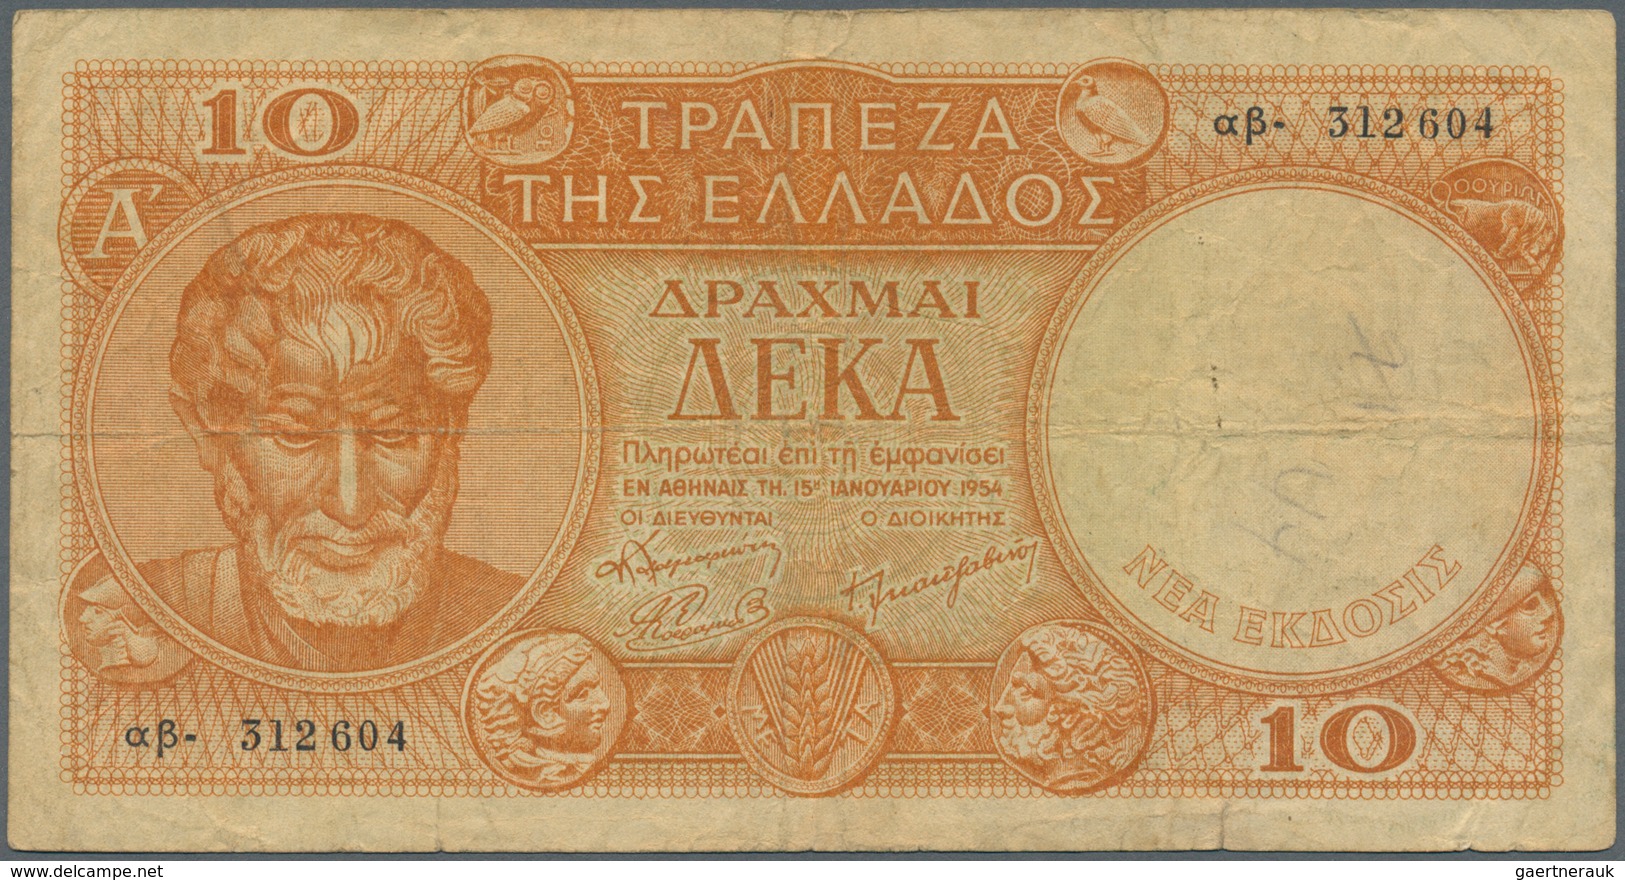 01643 Greece / Griechenland: 10 Drachmai 1954 P. 186a, Used With Several Folds, Stained Paper, Small Pen W - Greece